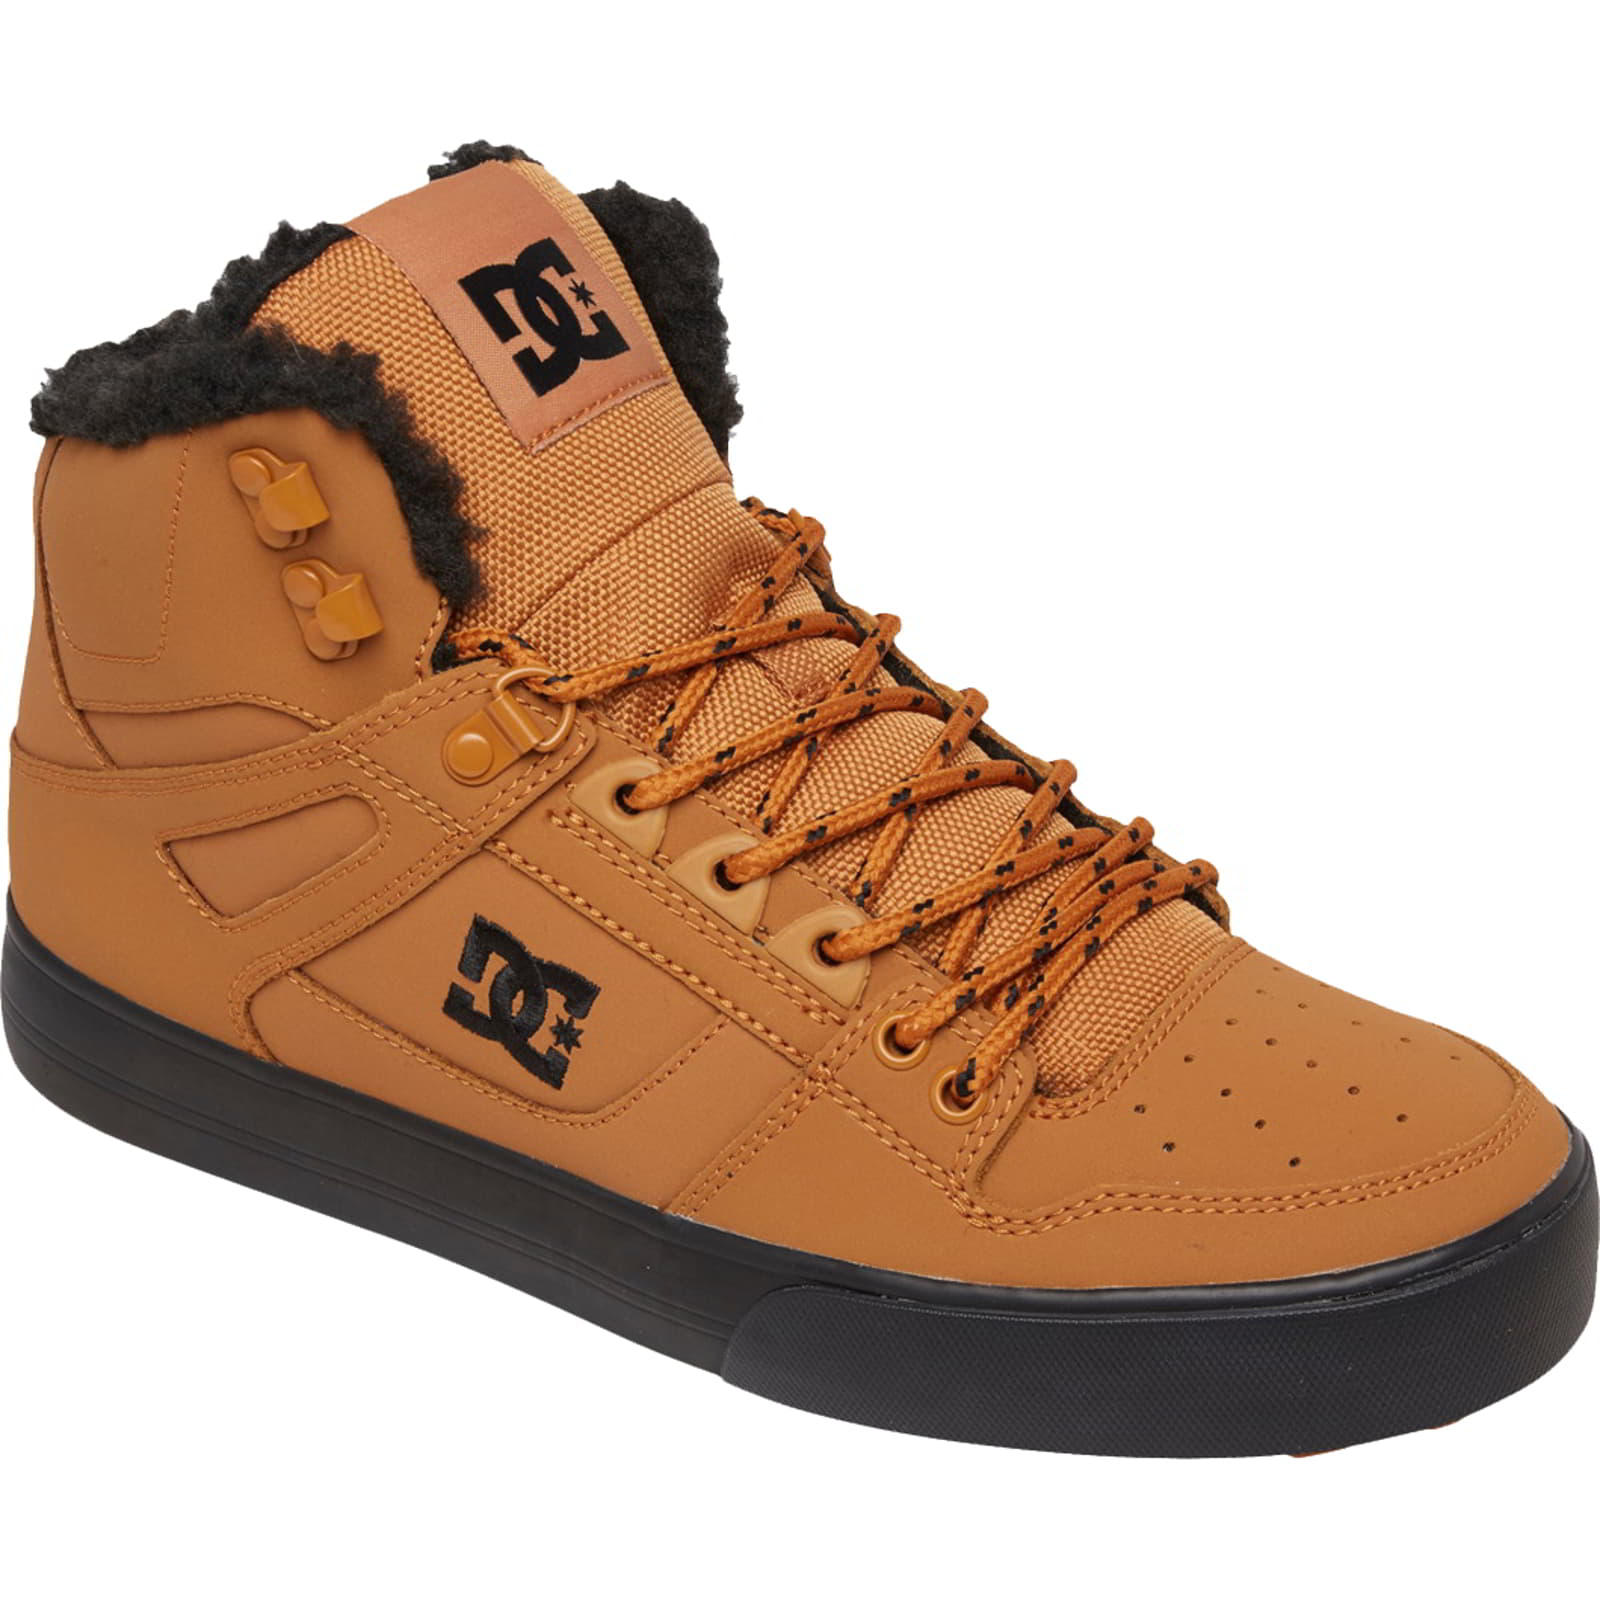 DC Men's Pure High Top WC WNT Hi Top Skate Shoes Trainers - UK 8 / US 9